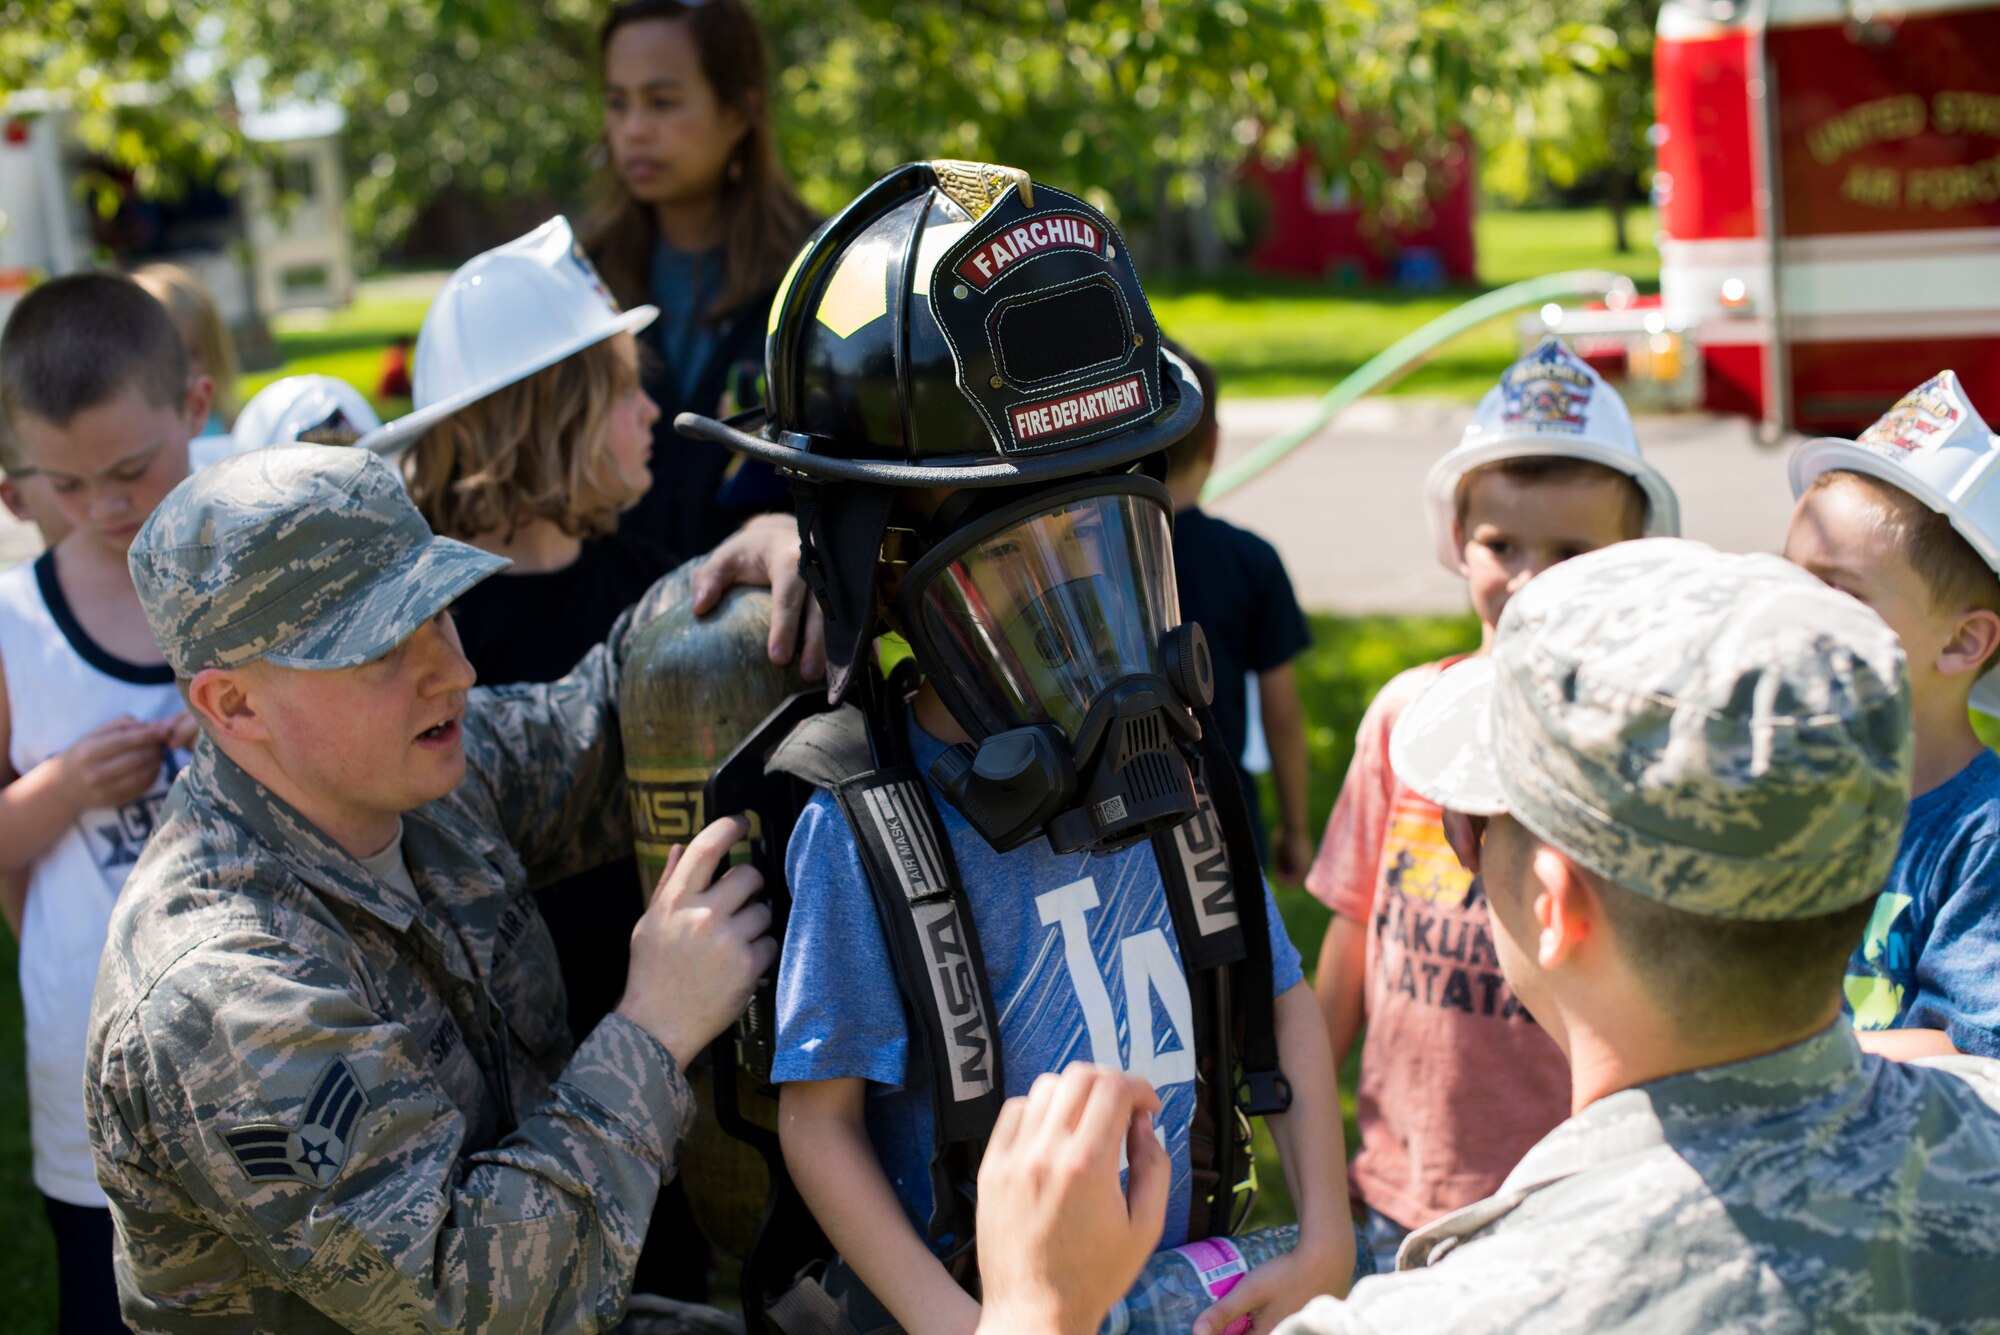 U.S. Air Force Senior Airman Brandon Smith (left) and Senior Airman Andrew Tanner (right), 92nd Civil Engineer Squadron firefighters, assist youth from Fairchild’s Youth Center in trying on equipment during the Summer Youth Fair at Fairchild Air Force Base, Washington, July 25, 2019. Members from Fairchild’s 92nd Civil Engineer Squadron Fire Department, Explosive Ordnance Disposal team, 92nd Security Forces Squadron and 92nd Medical Group provided activities and educational exhibits. (U.S. Air Force photo by Airman 1st Class Lawrence Sena)